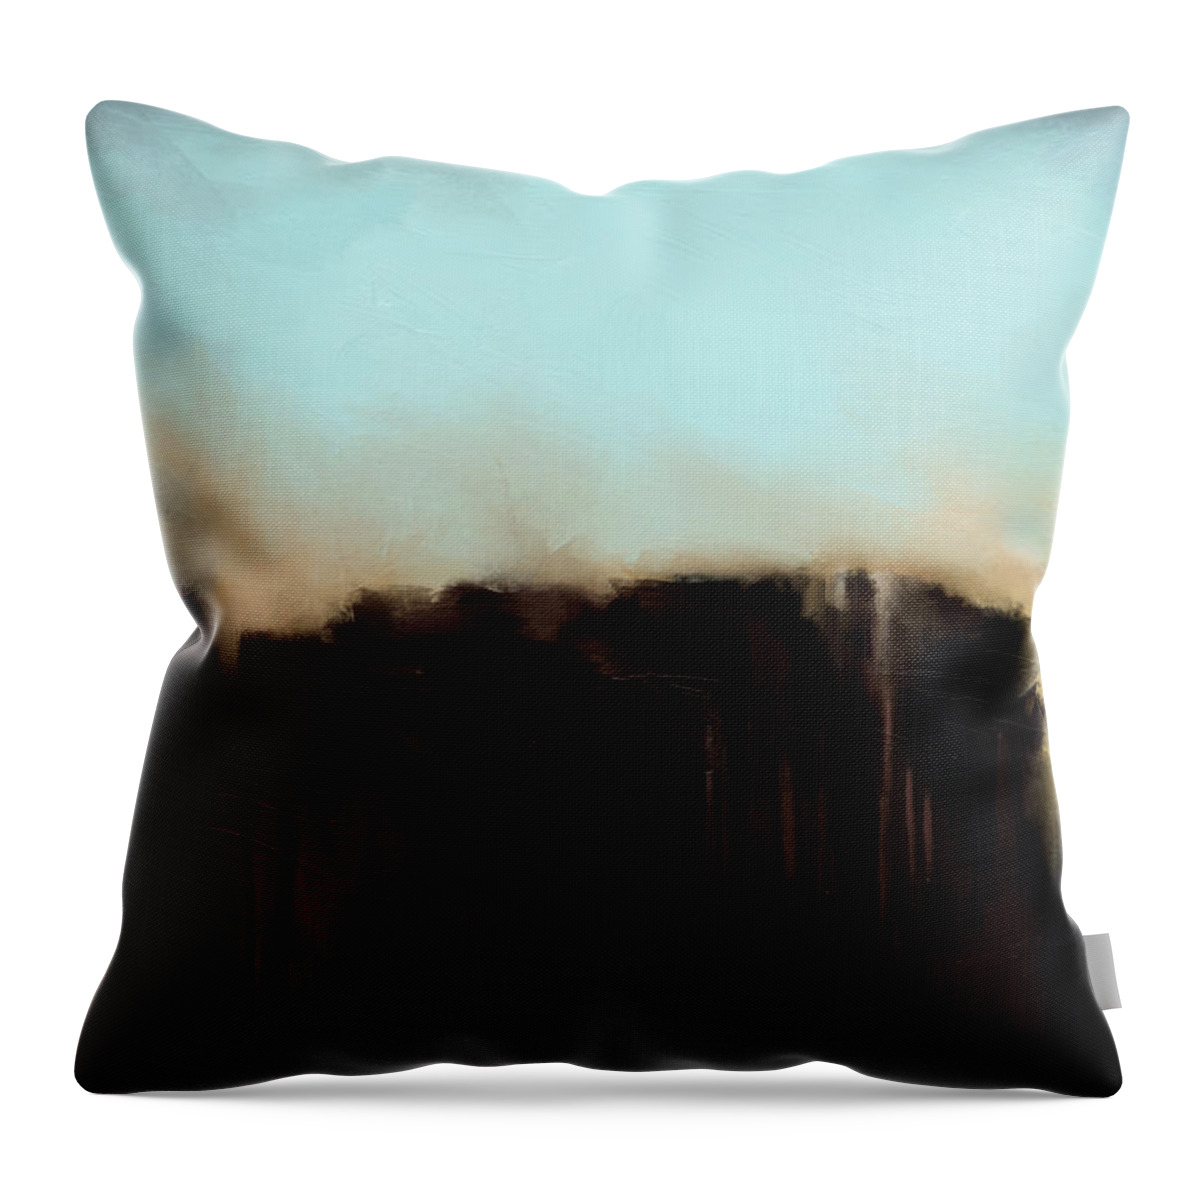 Abstract Landscape Throw Pillow featuring the painting The Western Ridge by Shawn Conn